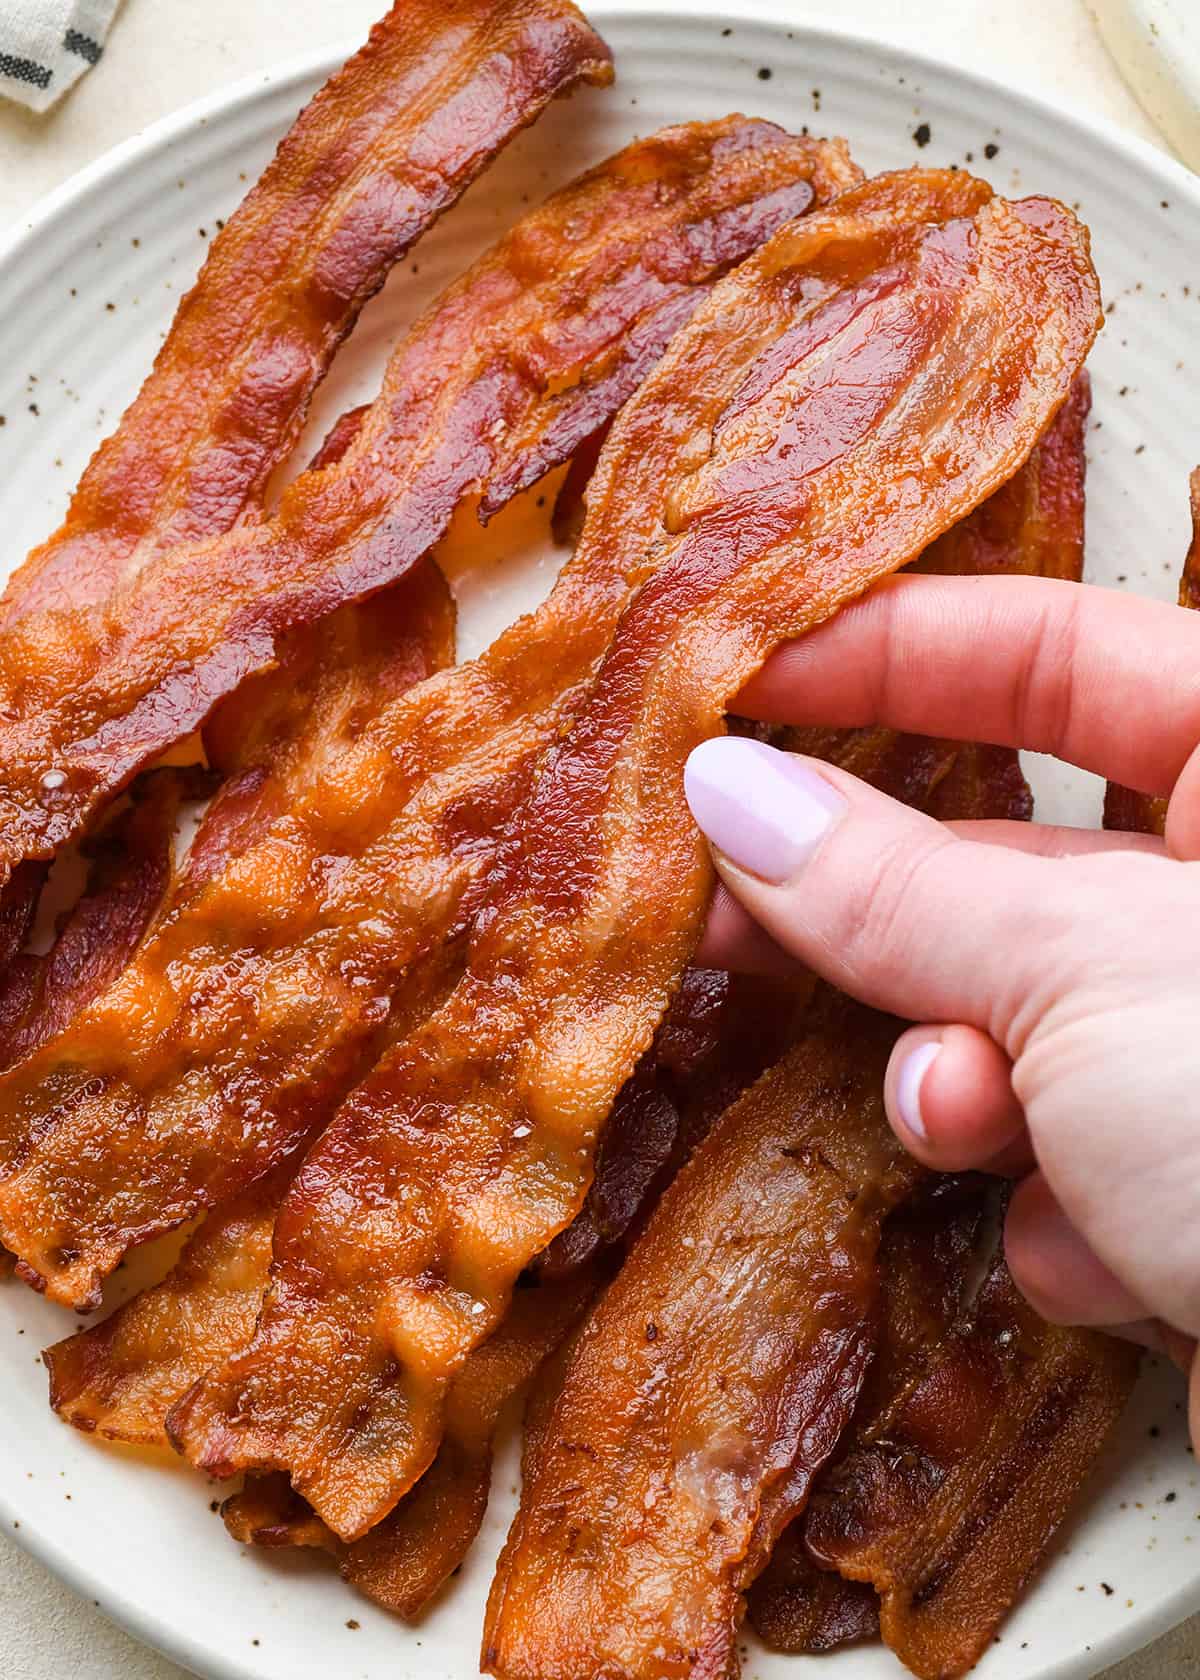 a hand picking up a piece of Oven Baked Bacon from a plate